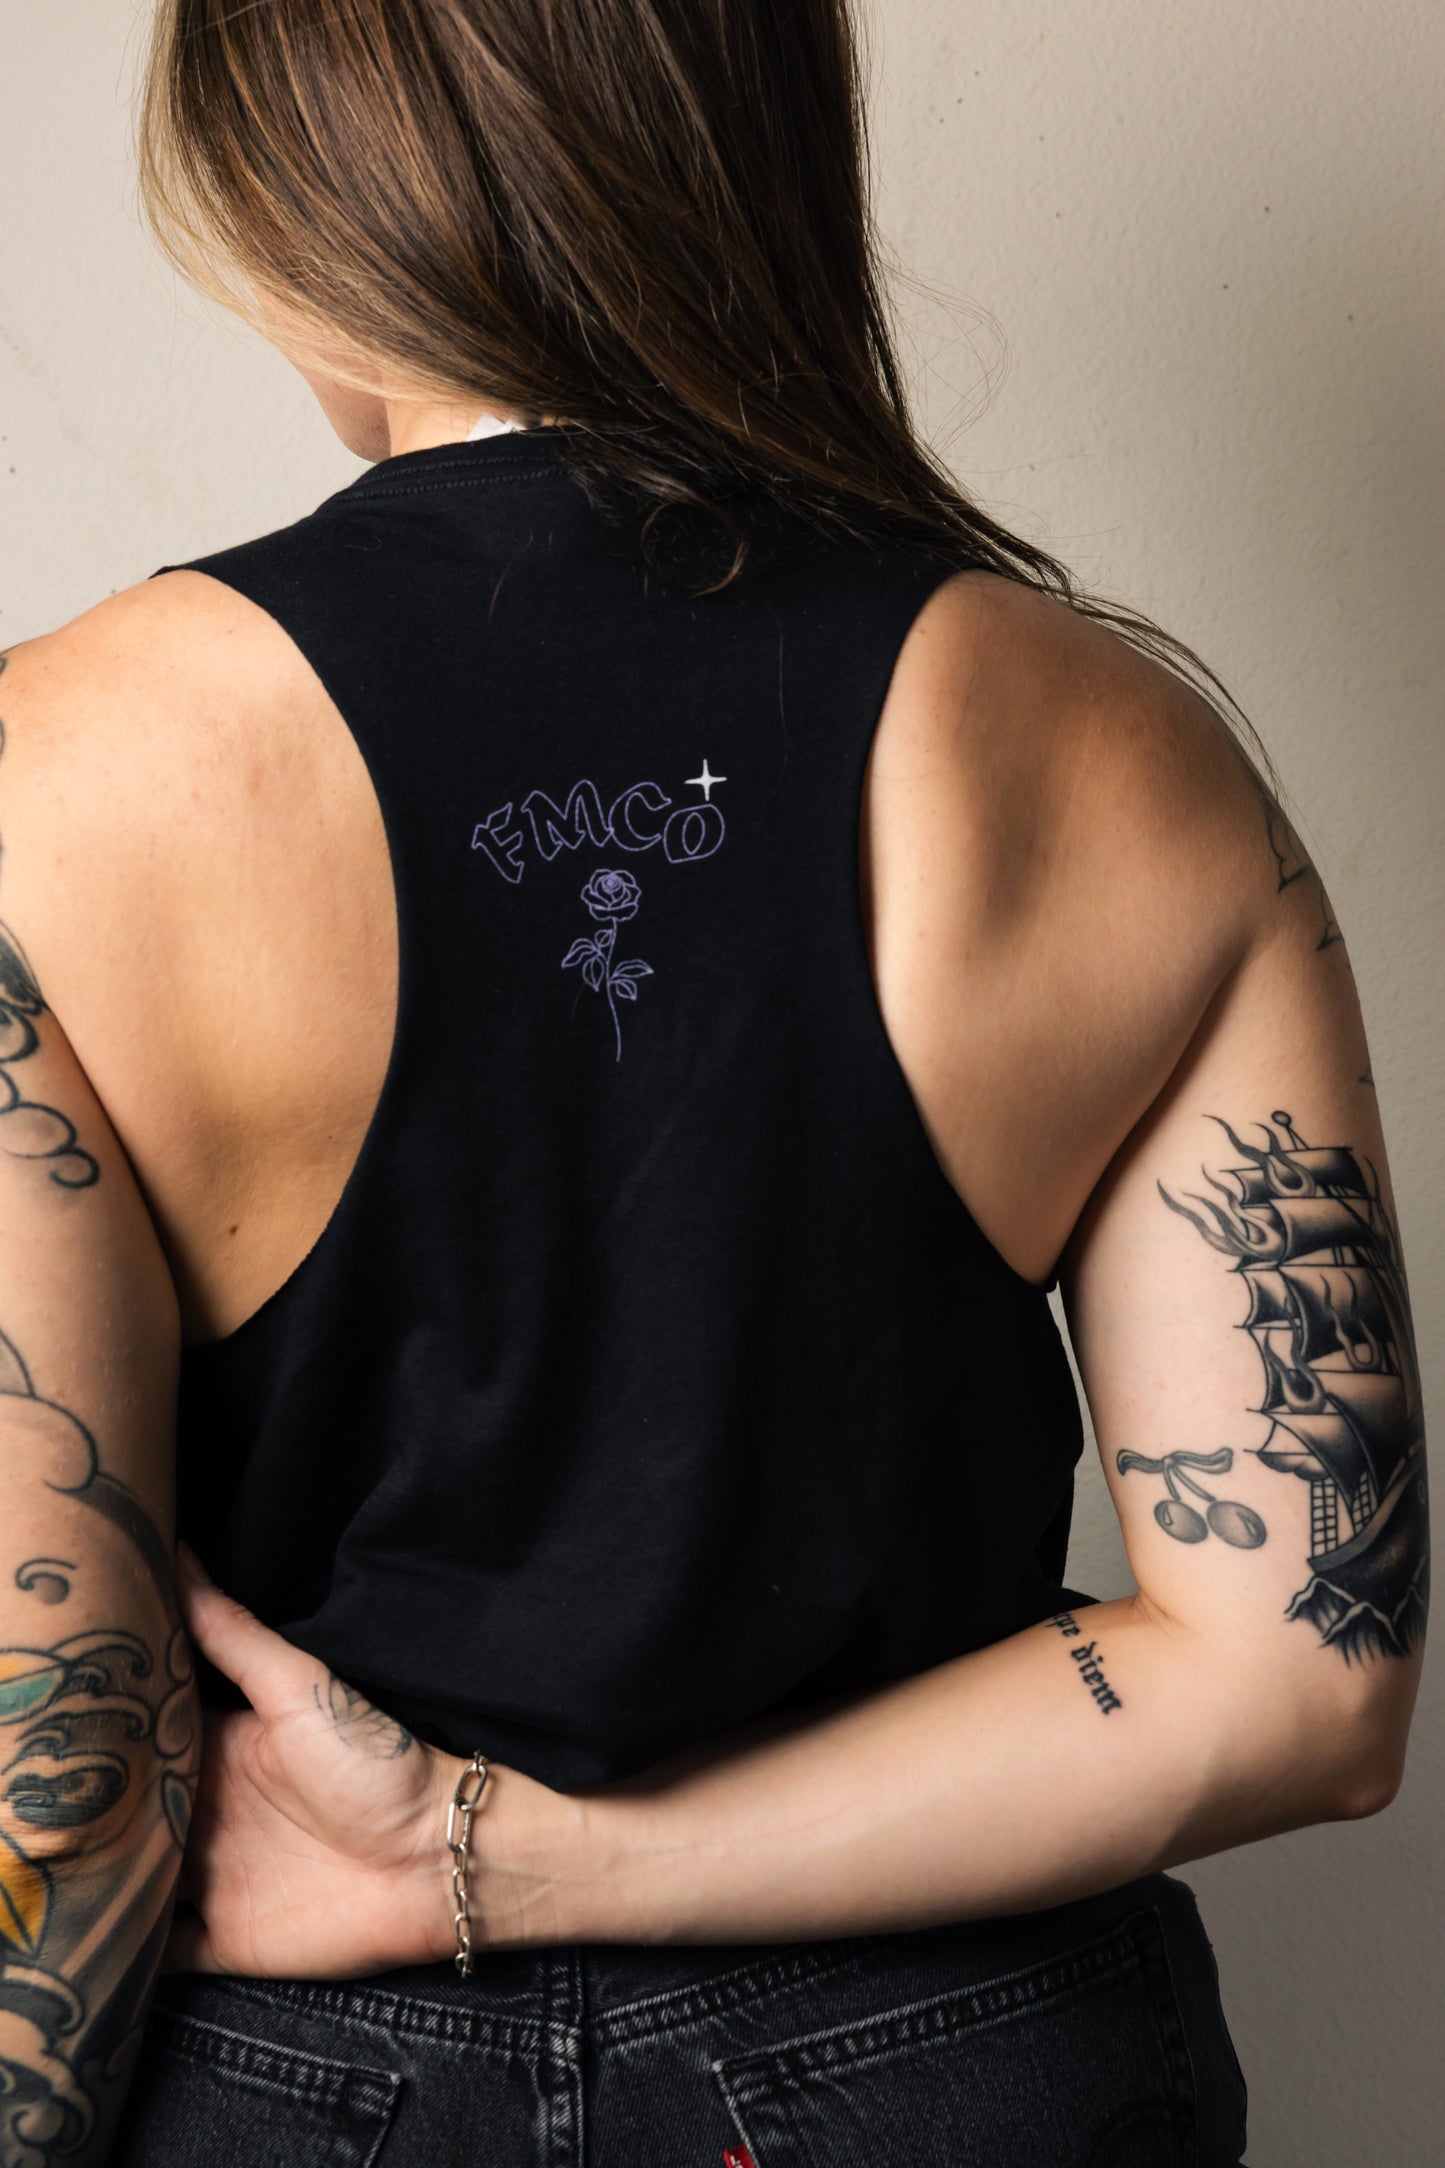 back details of the tank top that have a rose and the letters FMCO